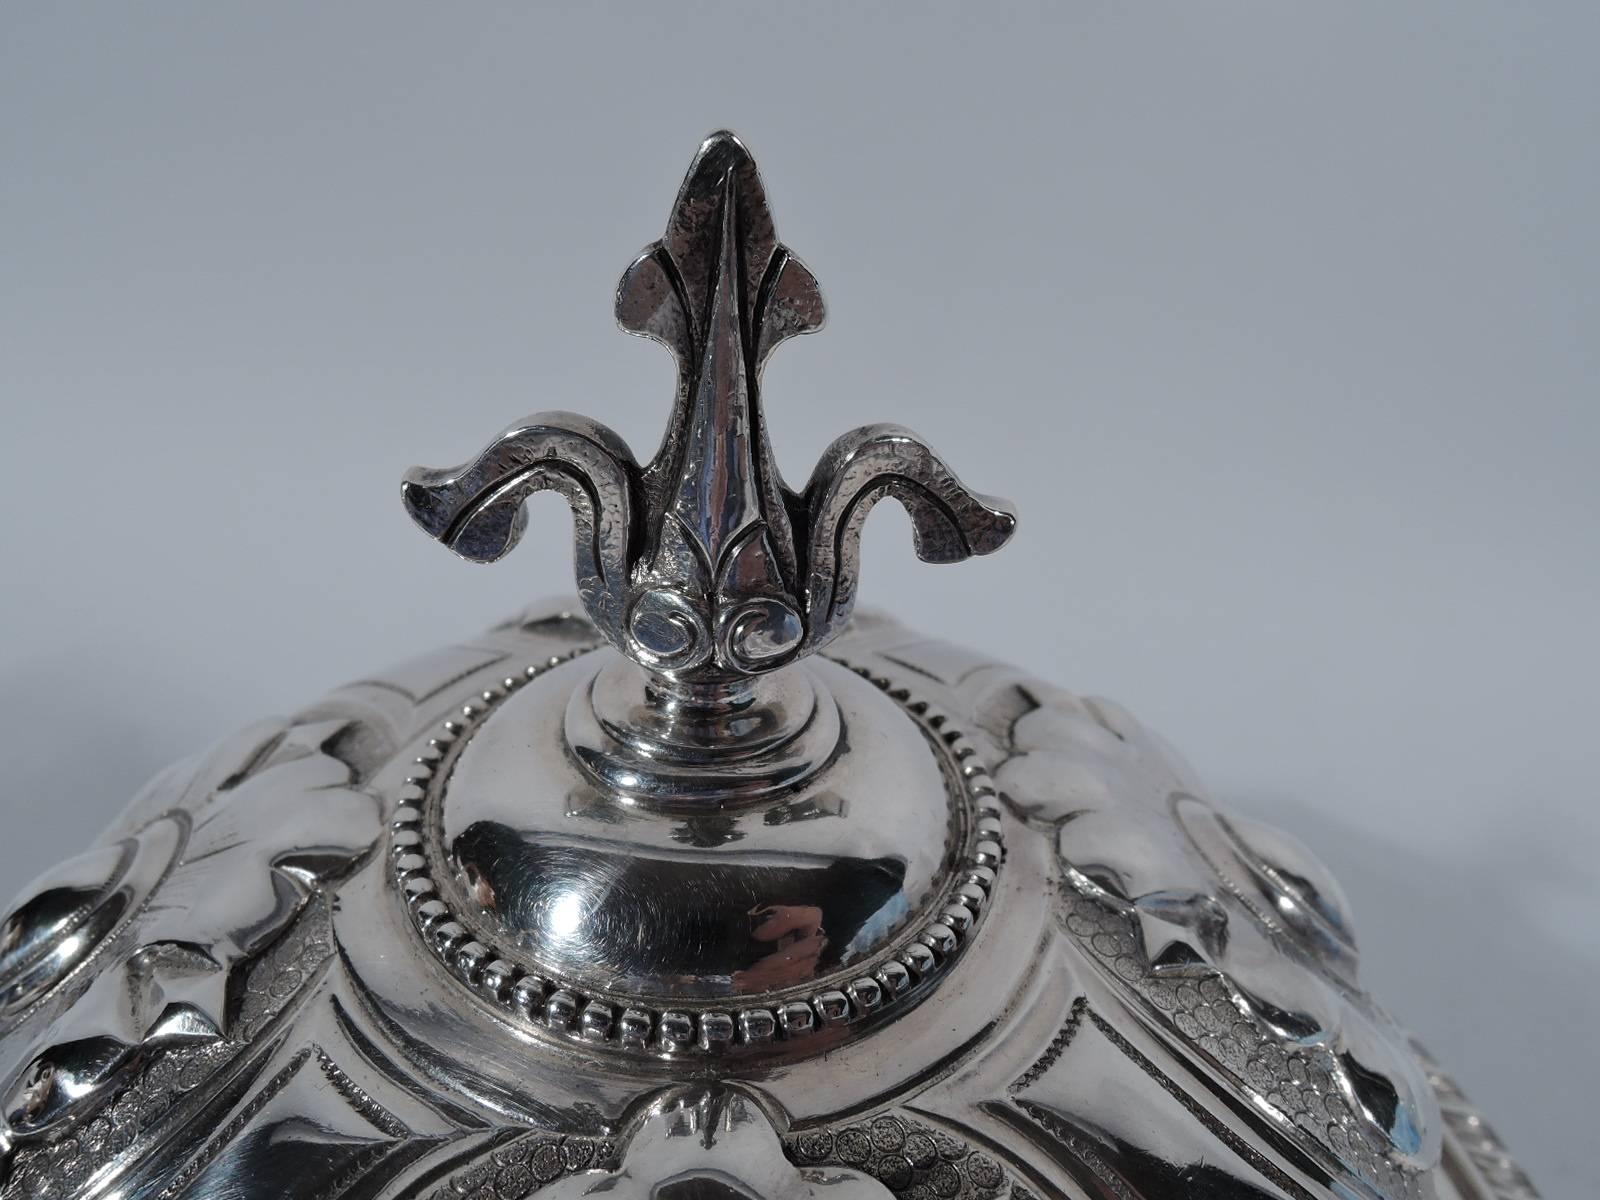 Early sterling silver covered butter dish. Made by Tiffany & Co. in in New York. Footed bowl with gadrooned rim. Domed cover with chased and repousse stylized blossoms on fish scale ground, beading and dentil, and fleur de lys finial. Four